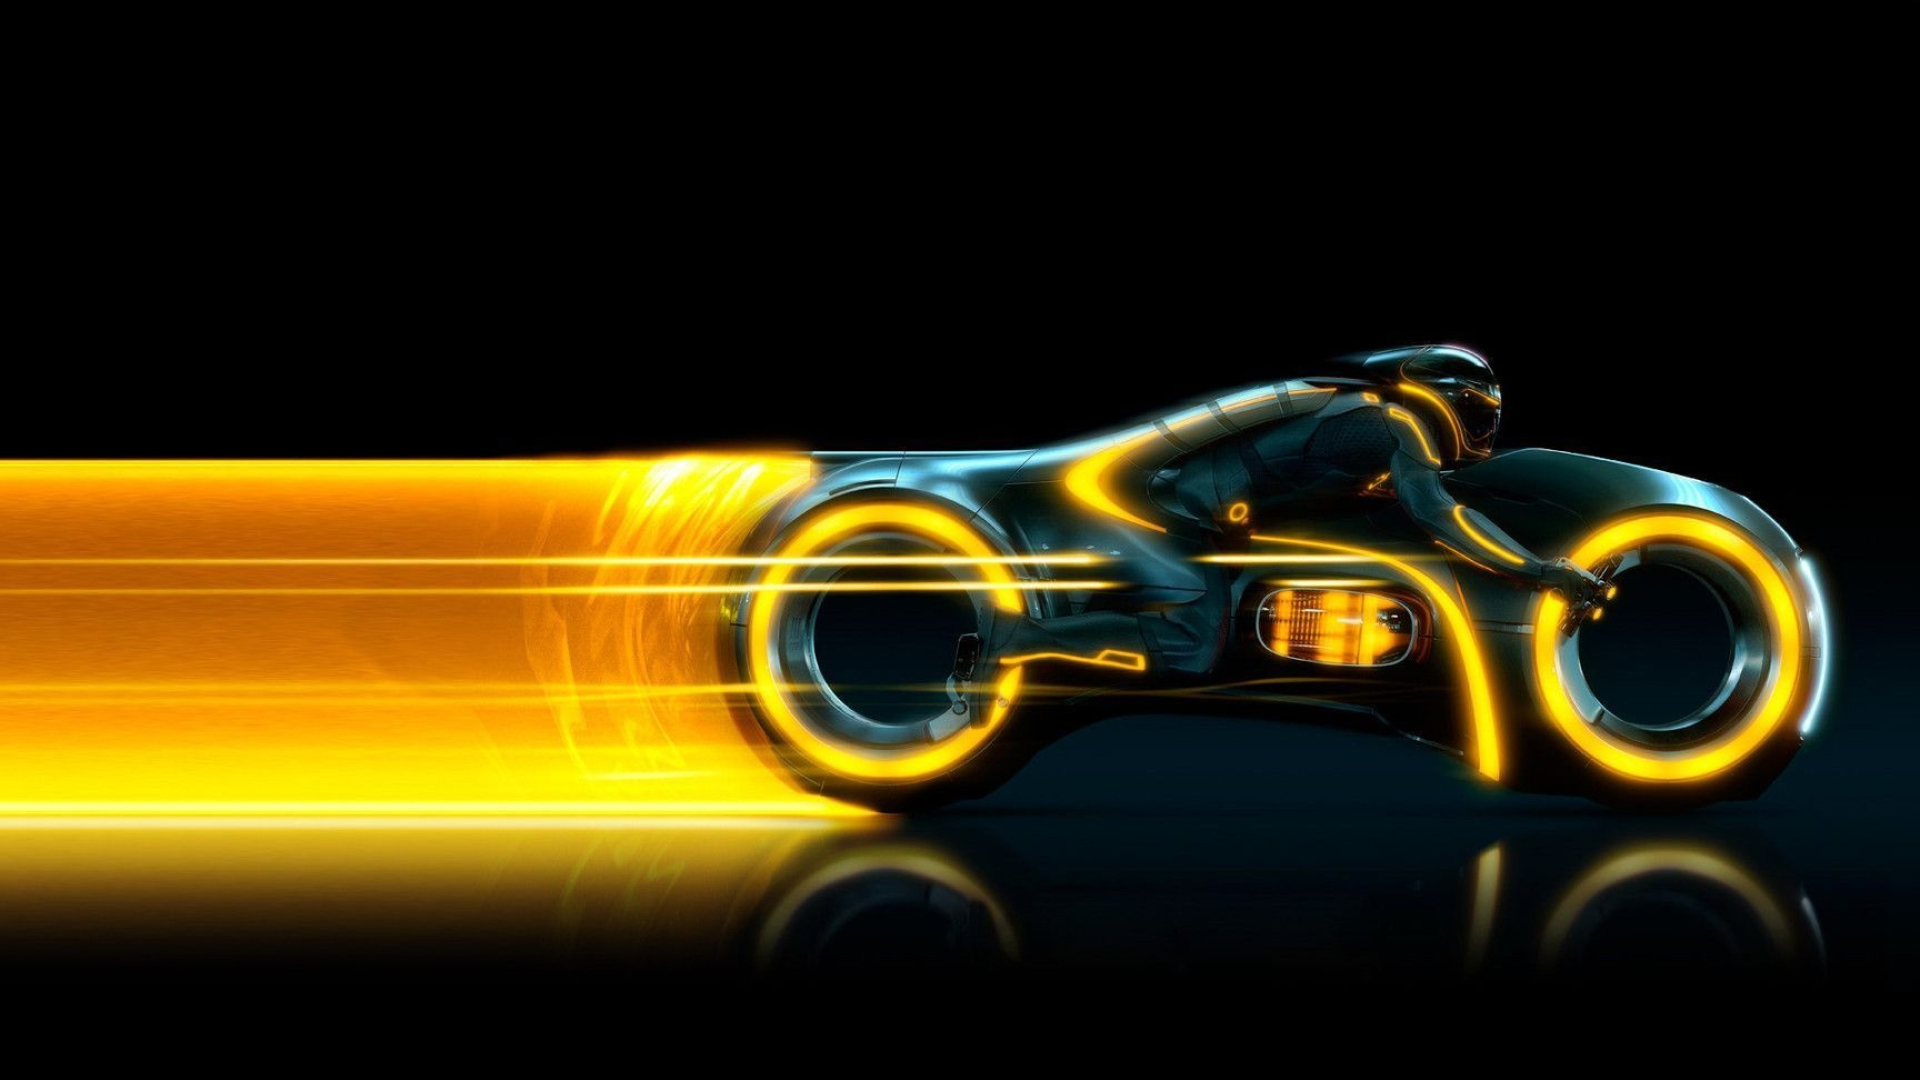 Tron (Movie): Legacy, A 2010 science fiction follow-up to the original 1982 film. 1920x1080 Full HD Wallpaper.